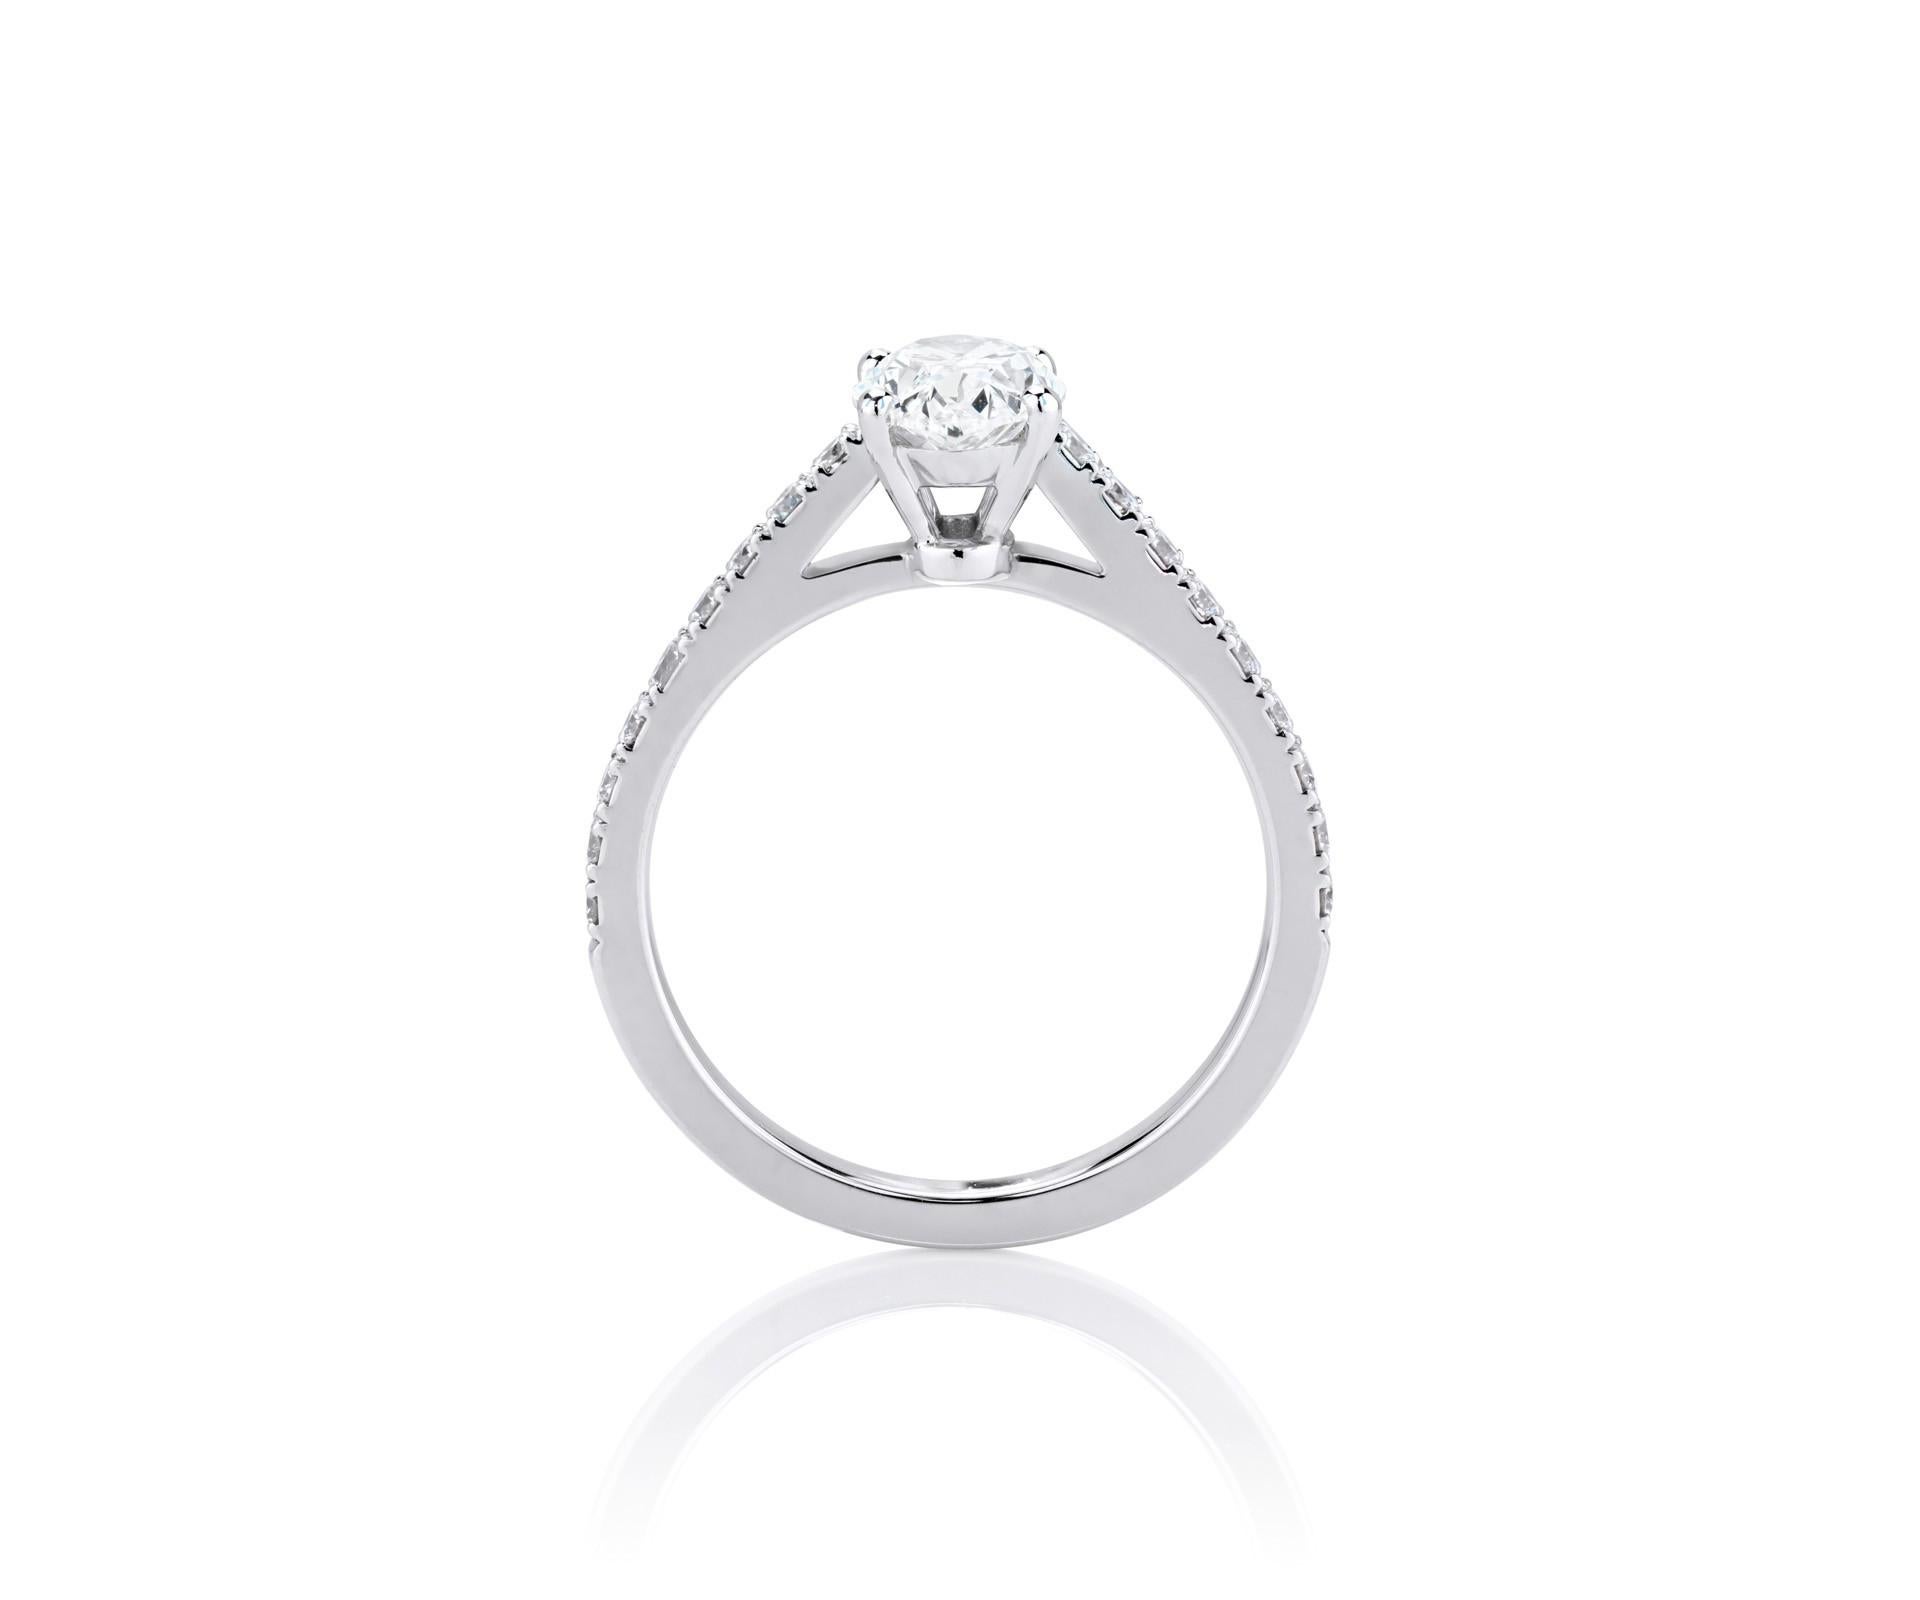 Center stone is 3 carat Oval cut GIA certified with the quality of H-I SI mounted in platinum 950. 